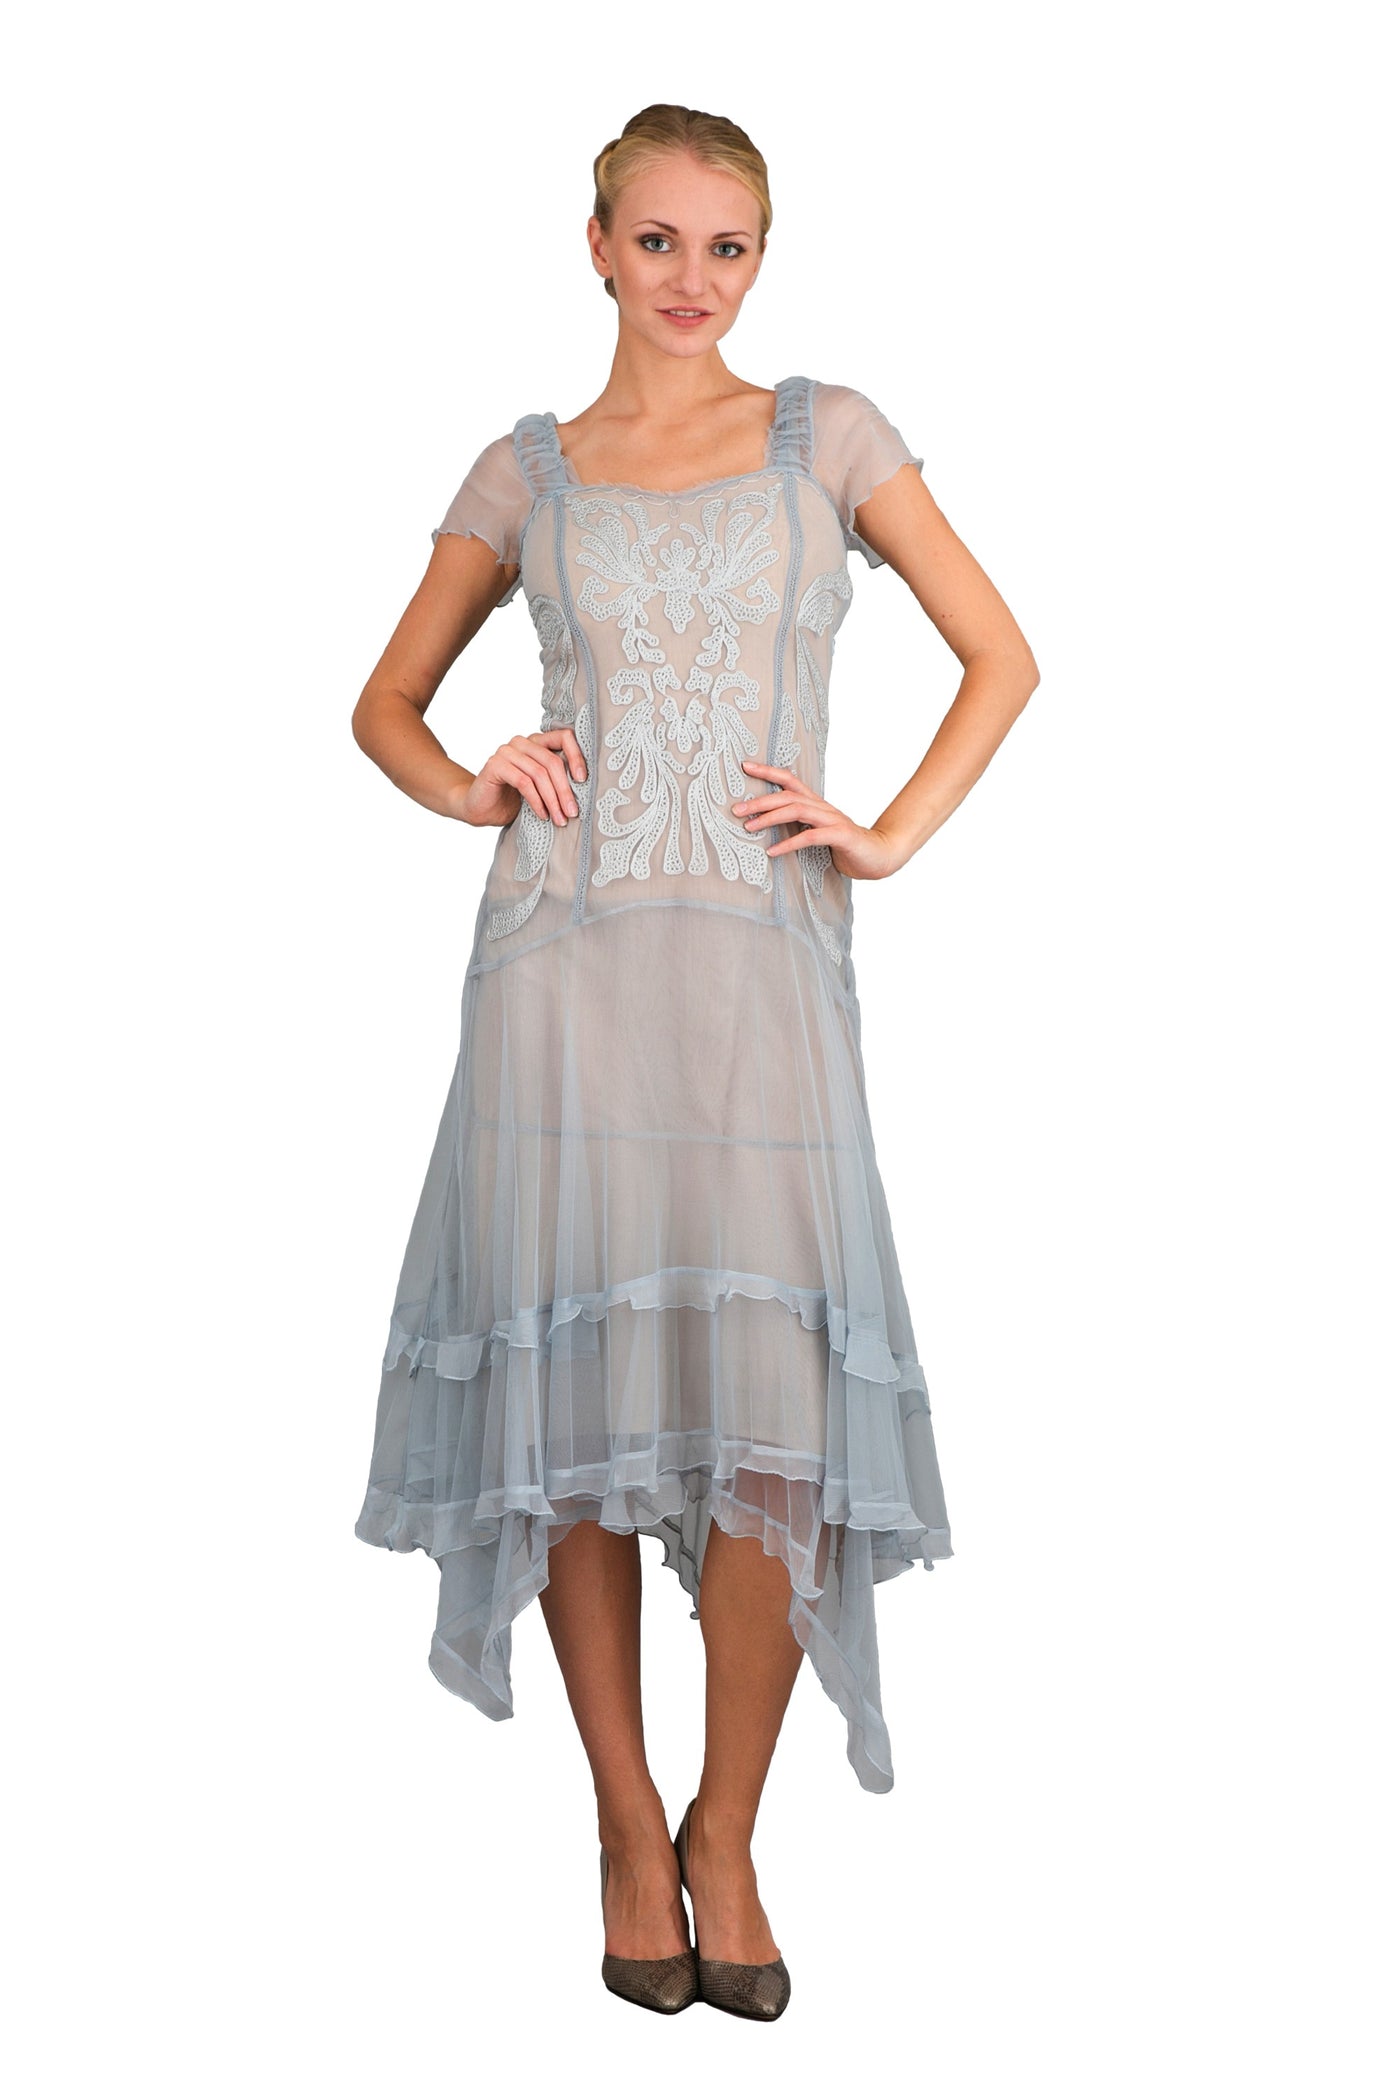 Romantic Vintage Inspired Party Dress in Blue by Nataya - SOLD OUT